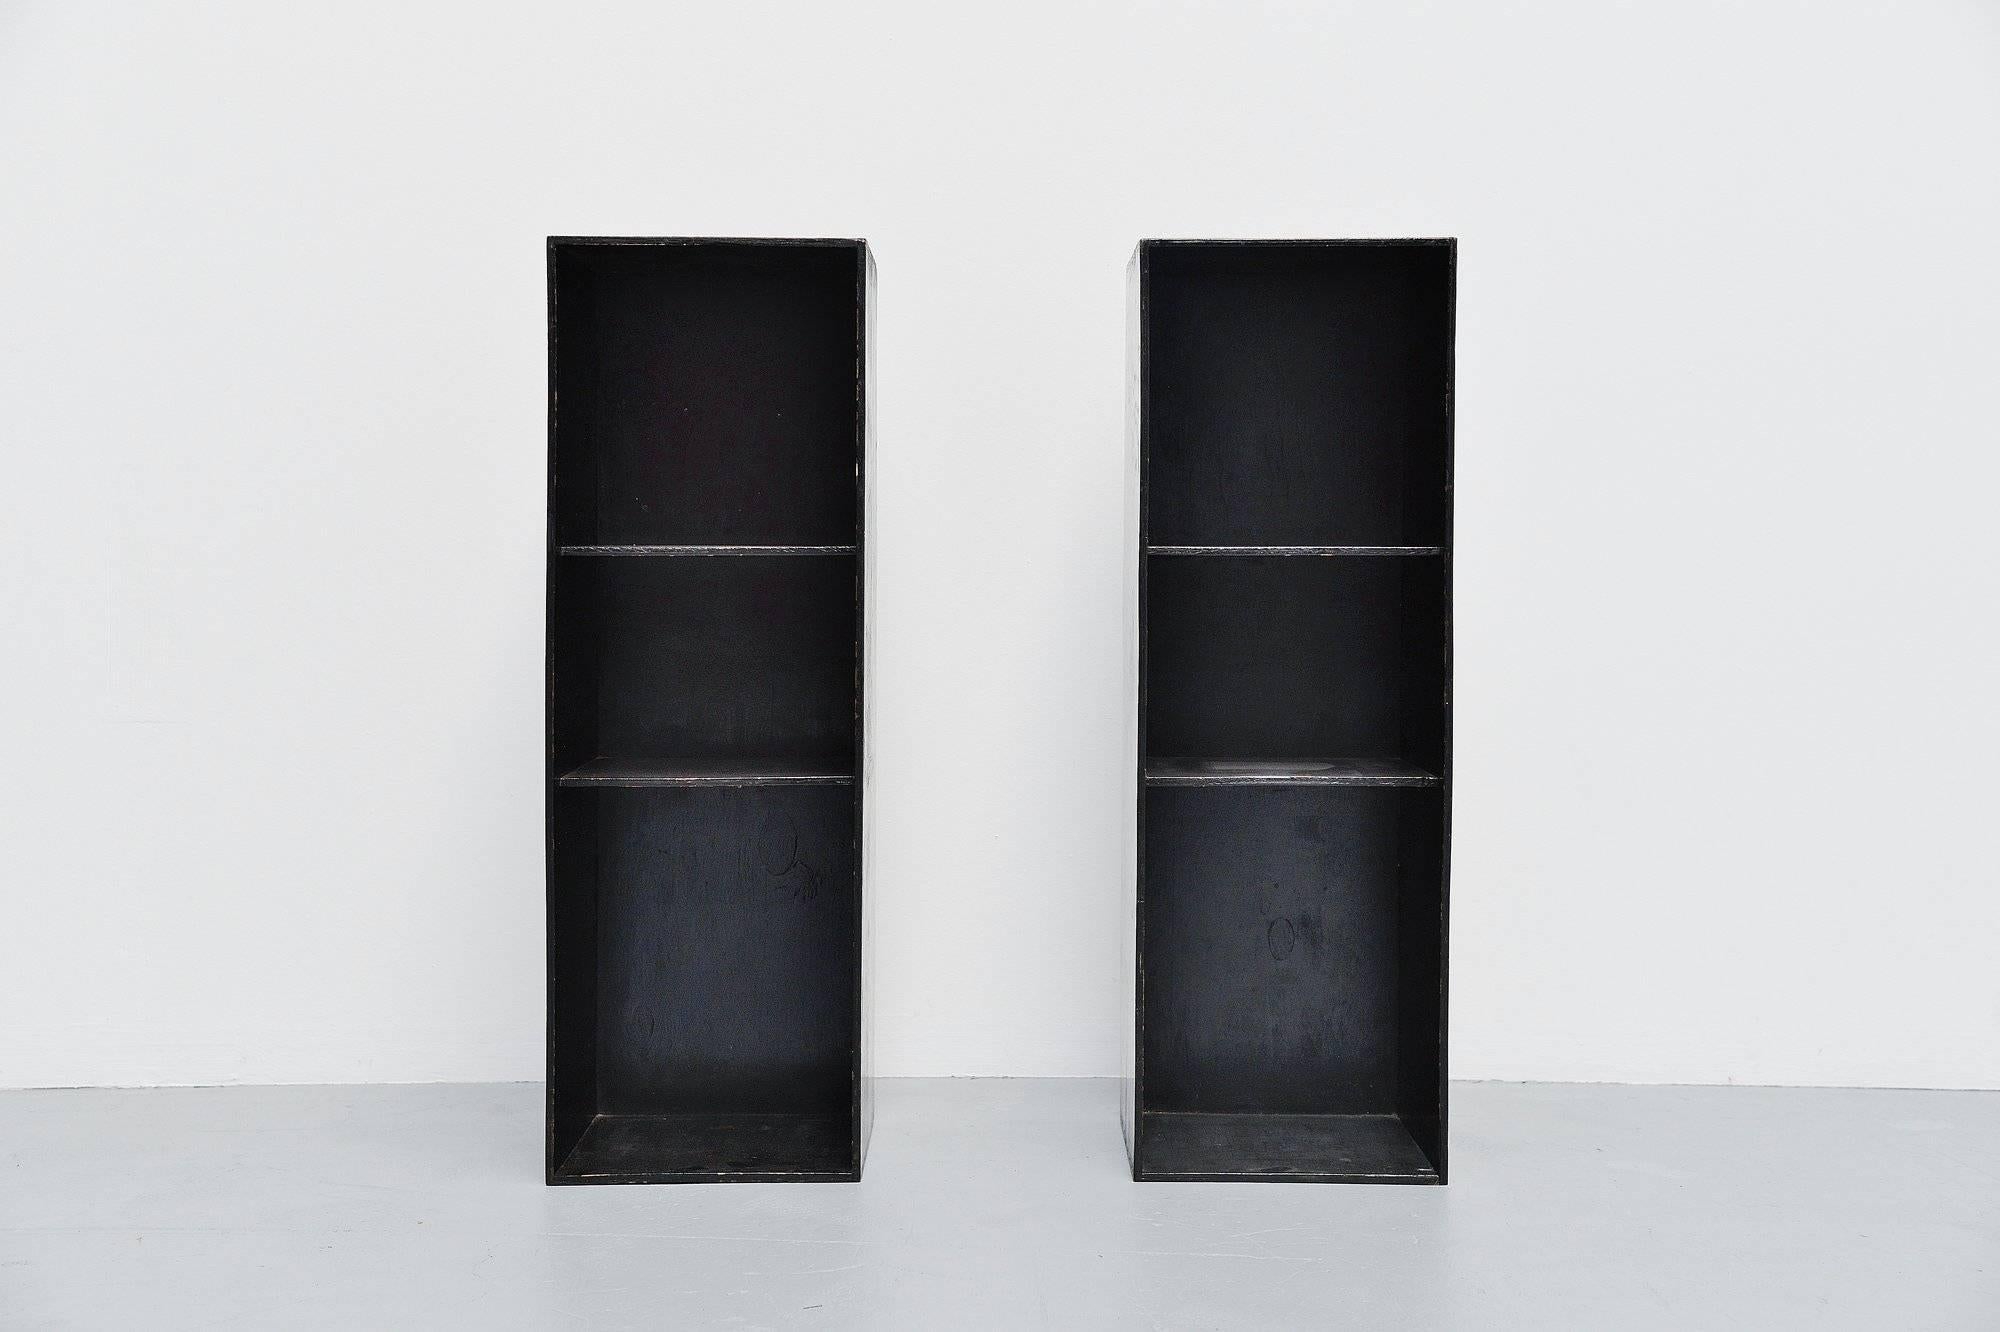 Modernist pair of cabinets from a modular system designed by Gerrit Rietveld with help of Truus Schroder, Holland 1935. These two cabinets come from a set of nine purchased by the family in 1935. Originally the cabinets had a black outside and red